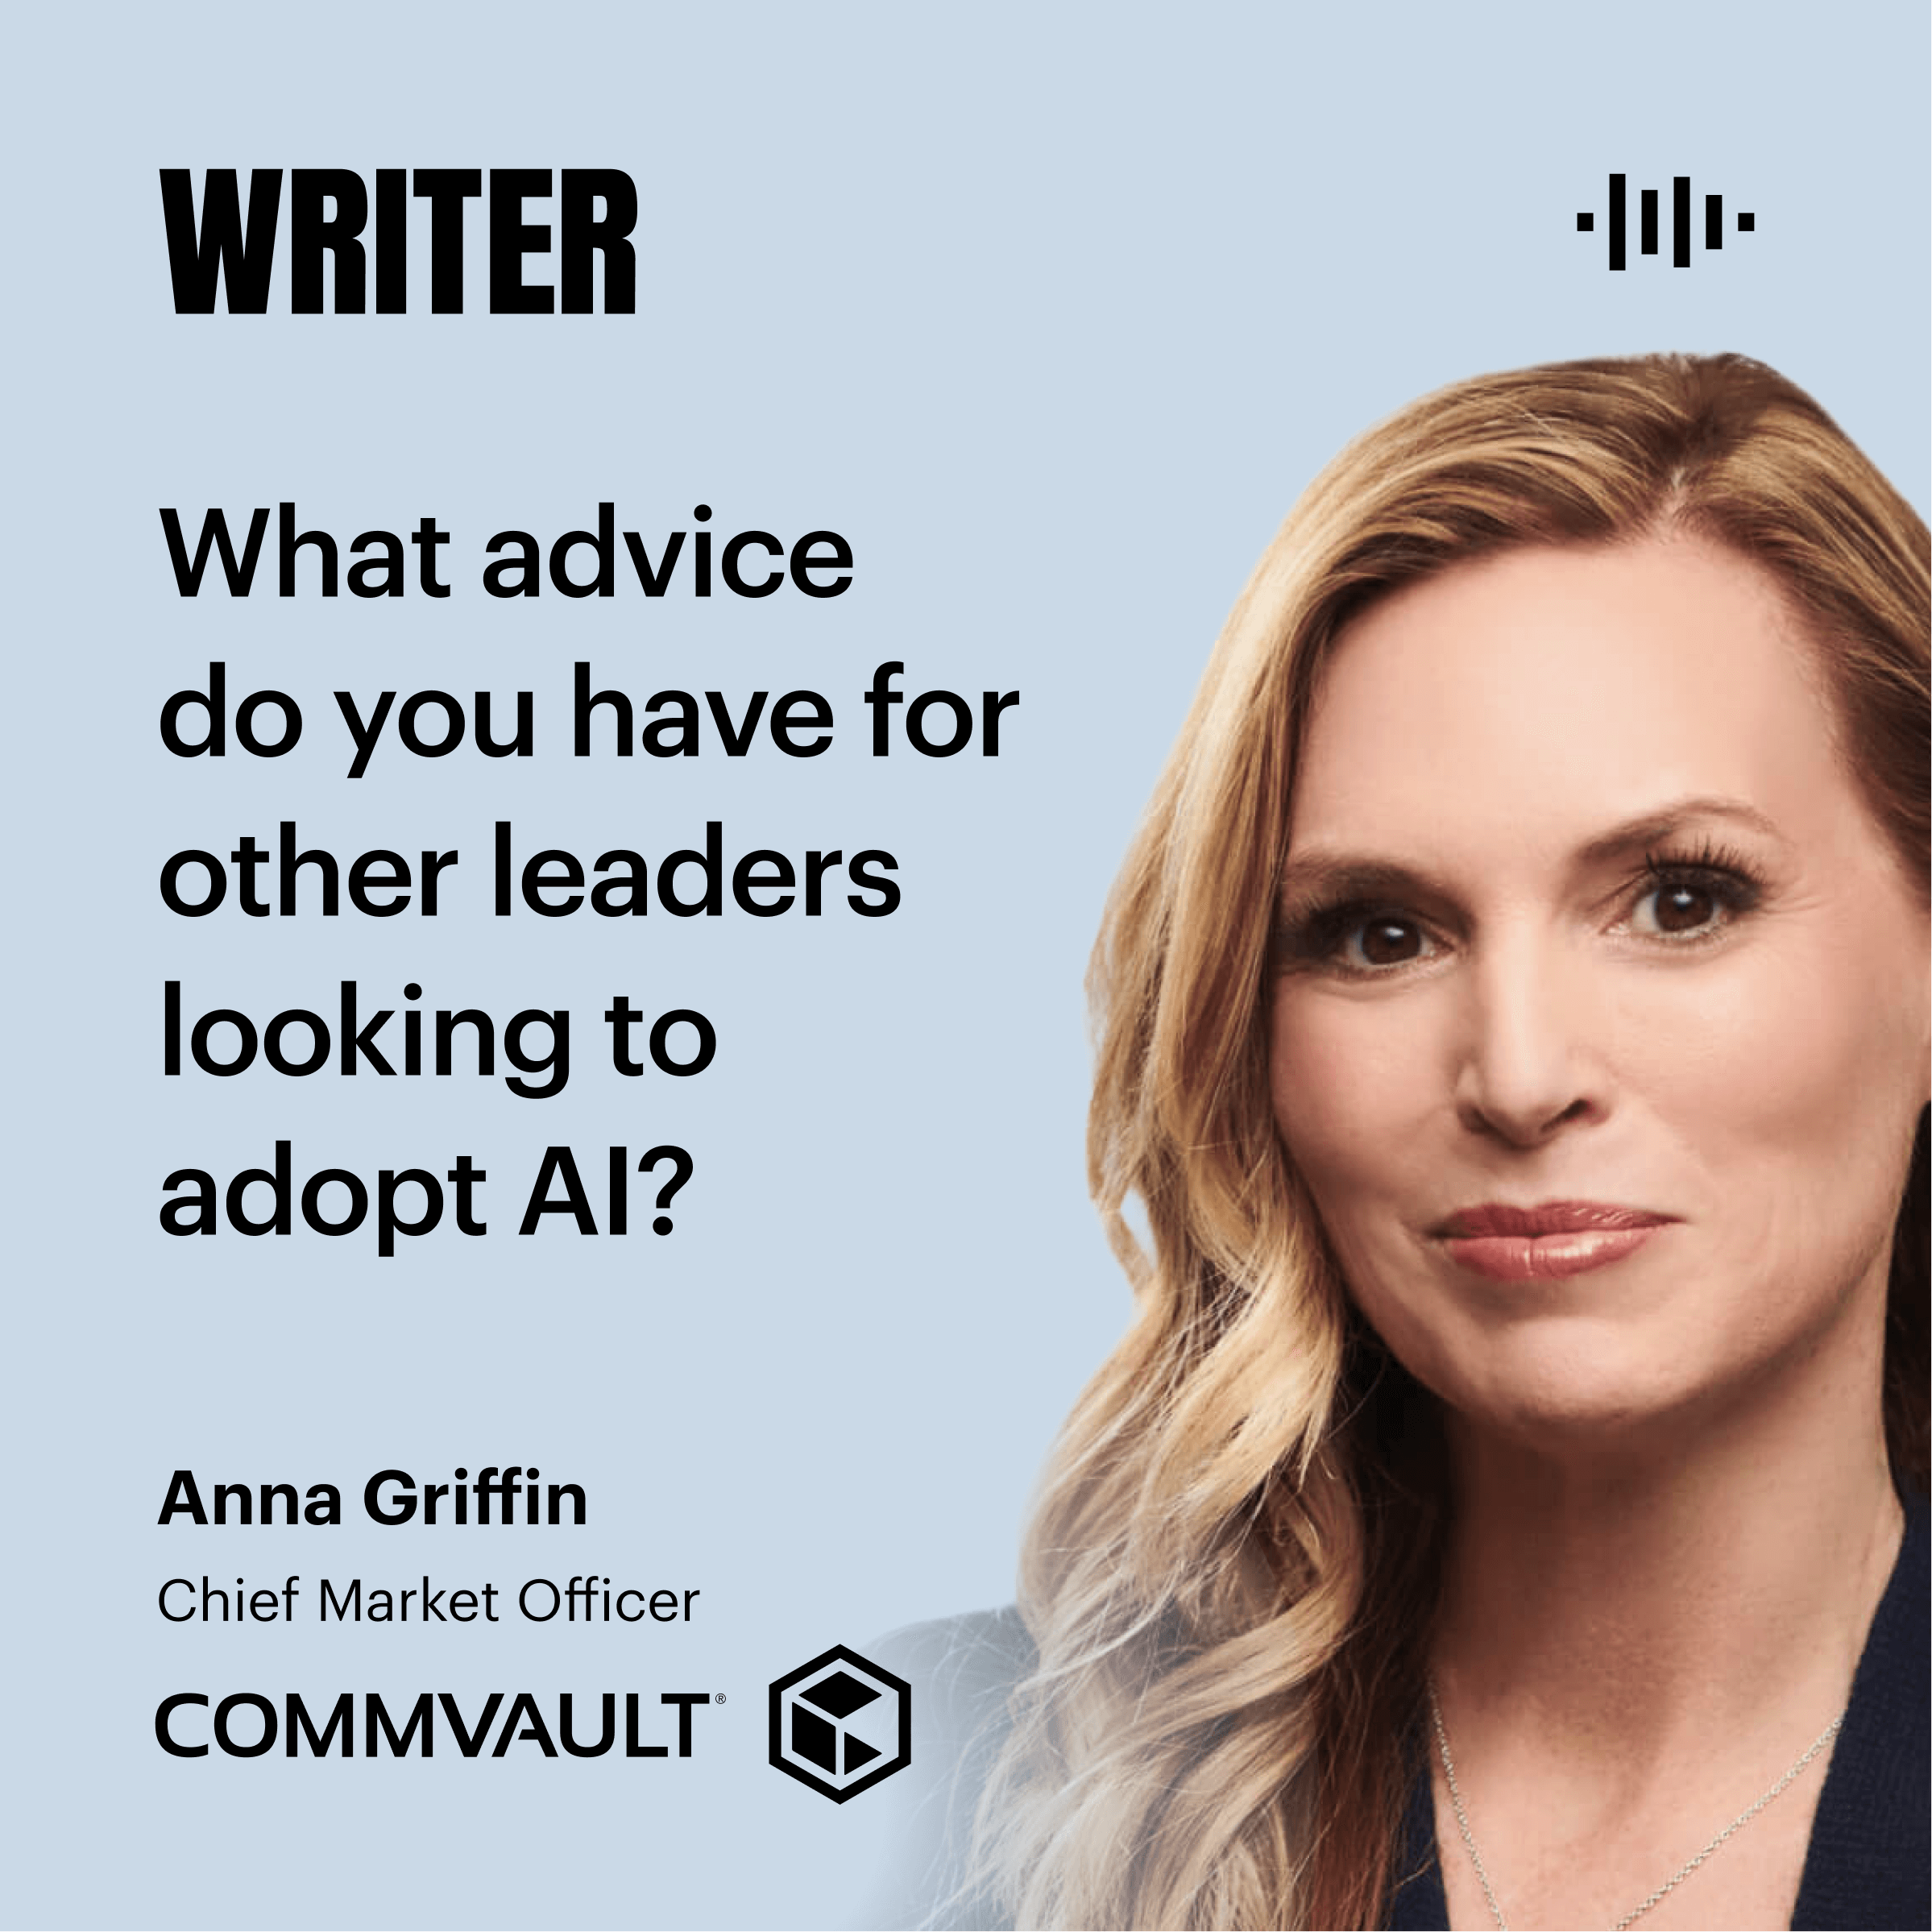 What advice do you have for other leaders looking to adopt AI?